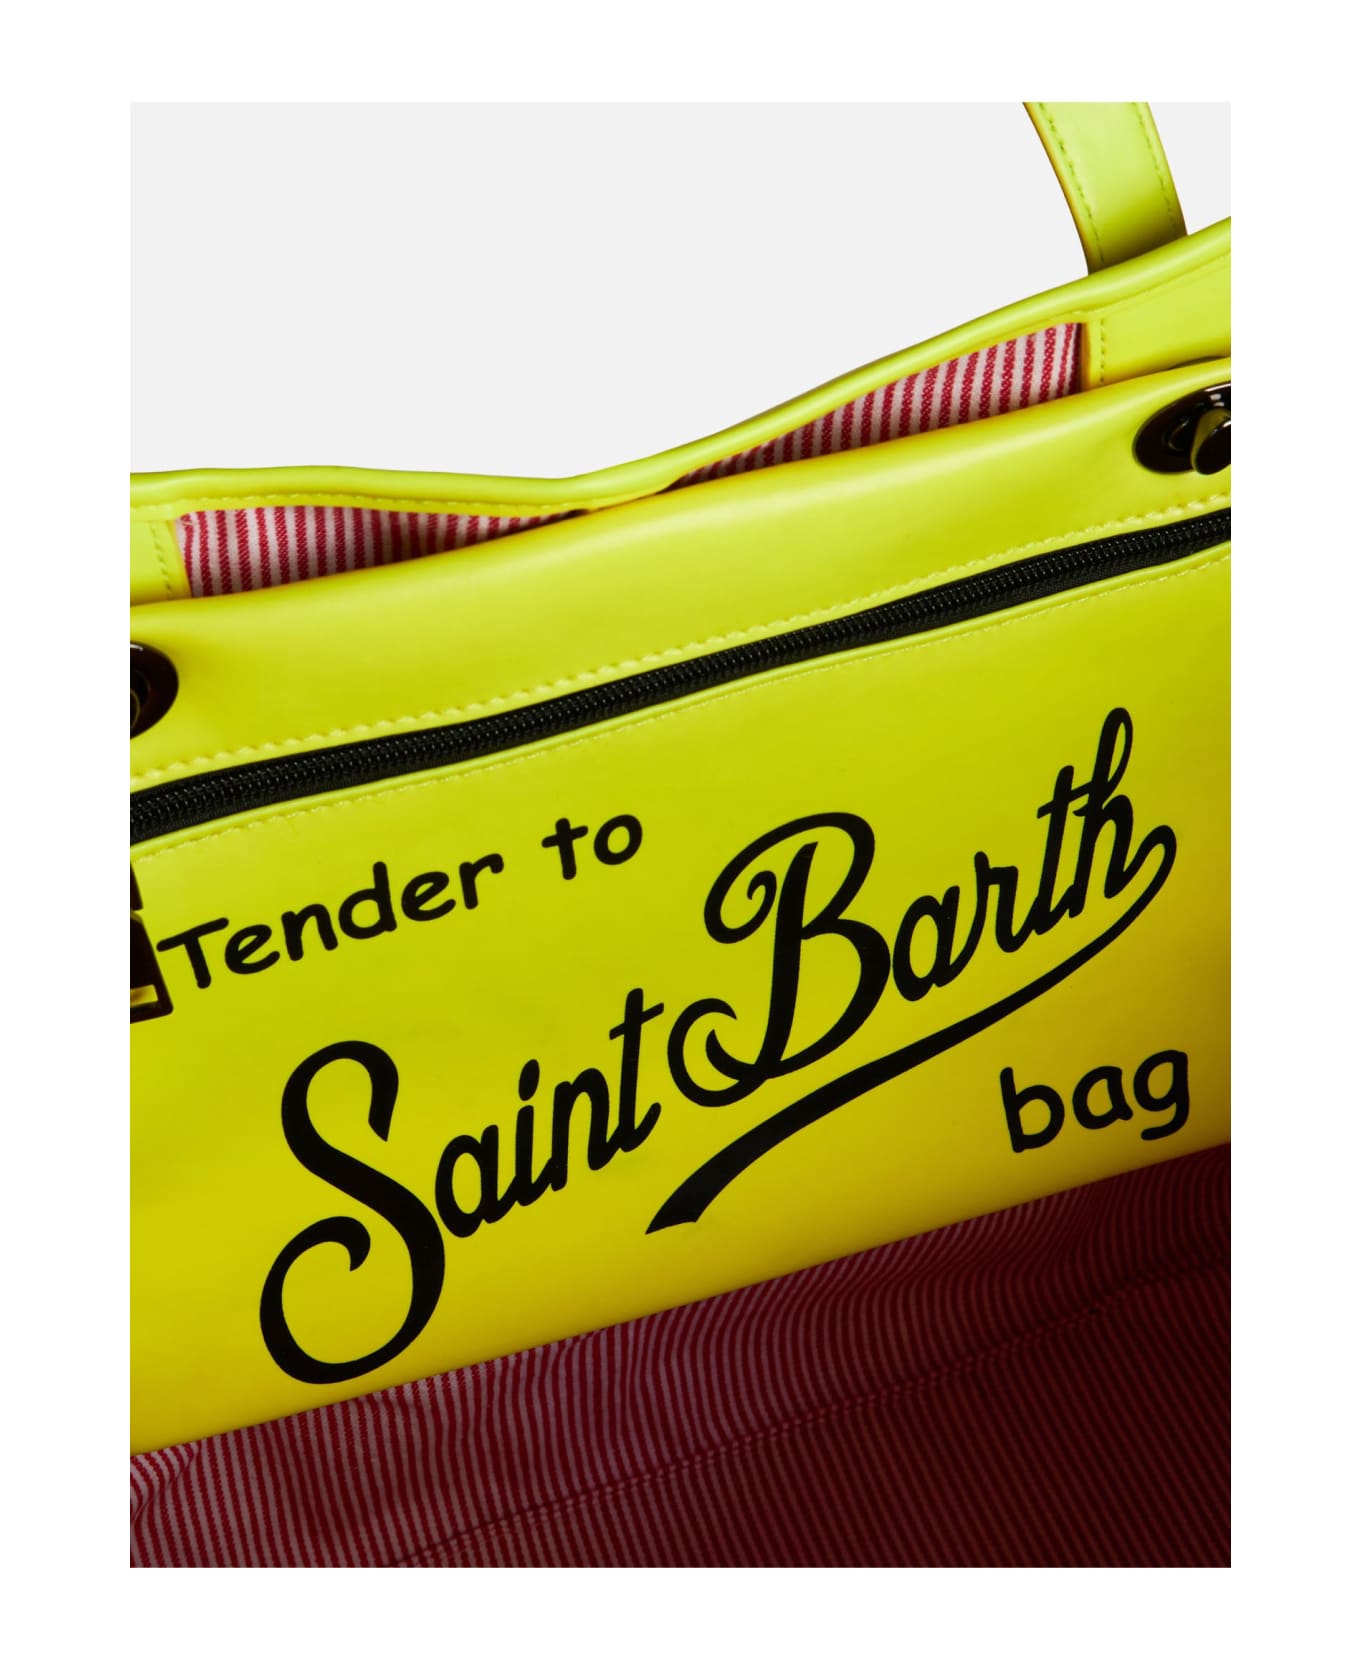 MC2 Saint Barth Silver Reflex Bag With Fluo Yellow Details - YELLOW トートバッグ